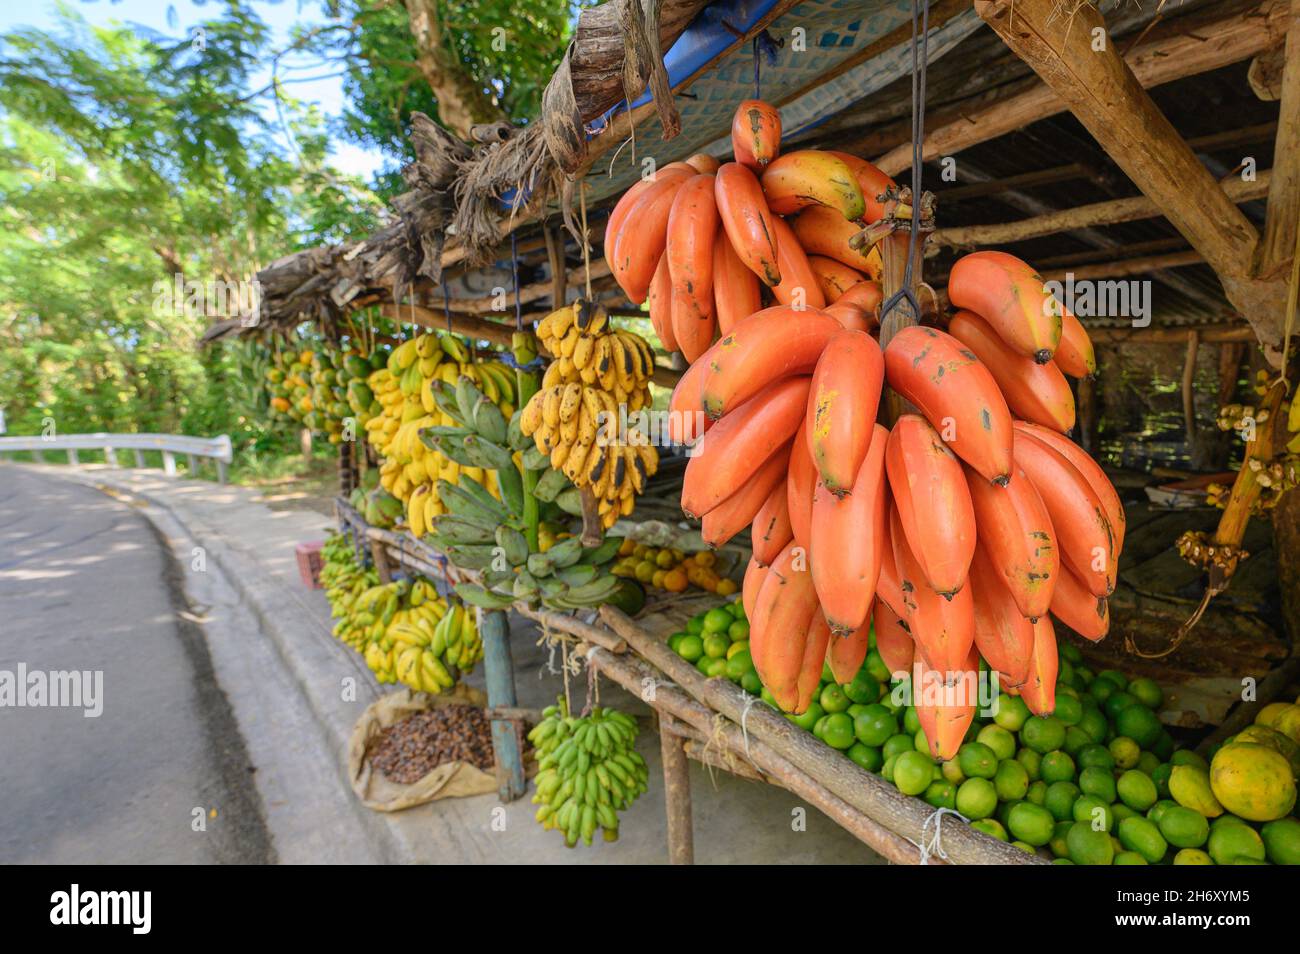 Roadside fruit market. Some tropical fruits wild orange, limes, bananas. Different fruits on tree. Exotic fruits are outdoor. Photo show variety types Stock Photo